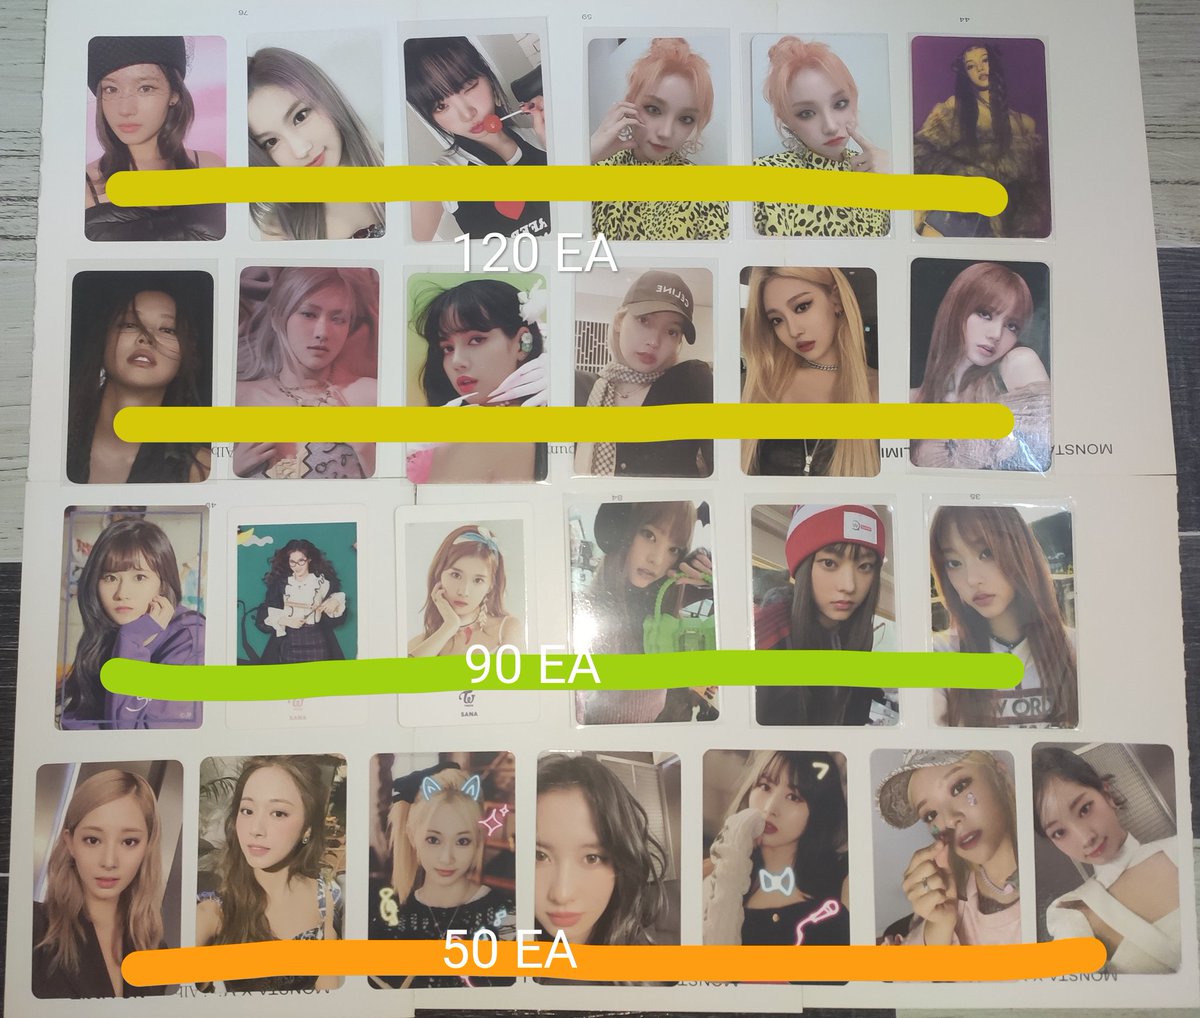 ╣⁠[Help me sell this photocards 🥹]⁠╠

WTS/LFB: RANDOM BTS/GIRL GROUP PHOTOCARDS

✨Prices are indicated in the photo
✨Gcash mop and sco mod
✨kindly pm me if interested

#btsphotocards #aespa #twice #itzy #lesserafim